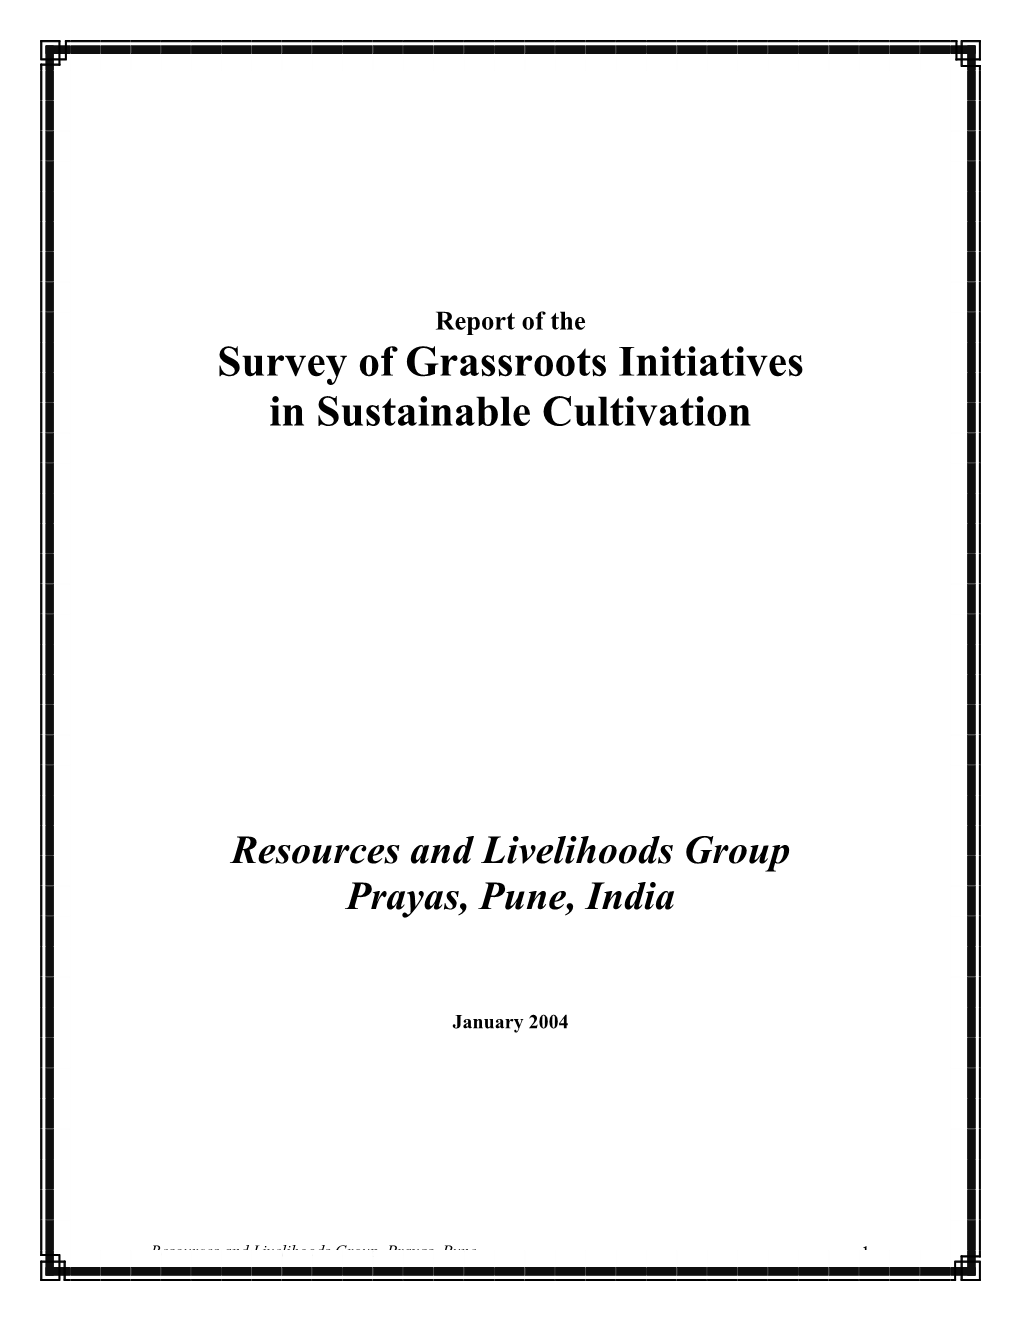 Survey of Grassroots Initiatives in Sustainable Cultivation